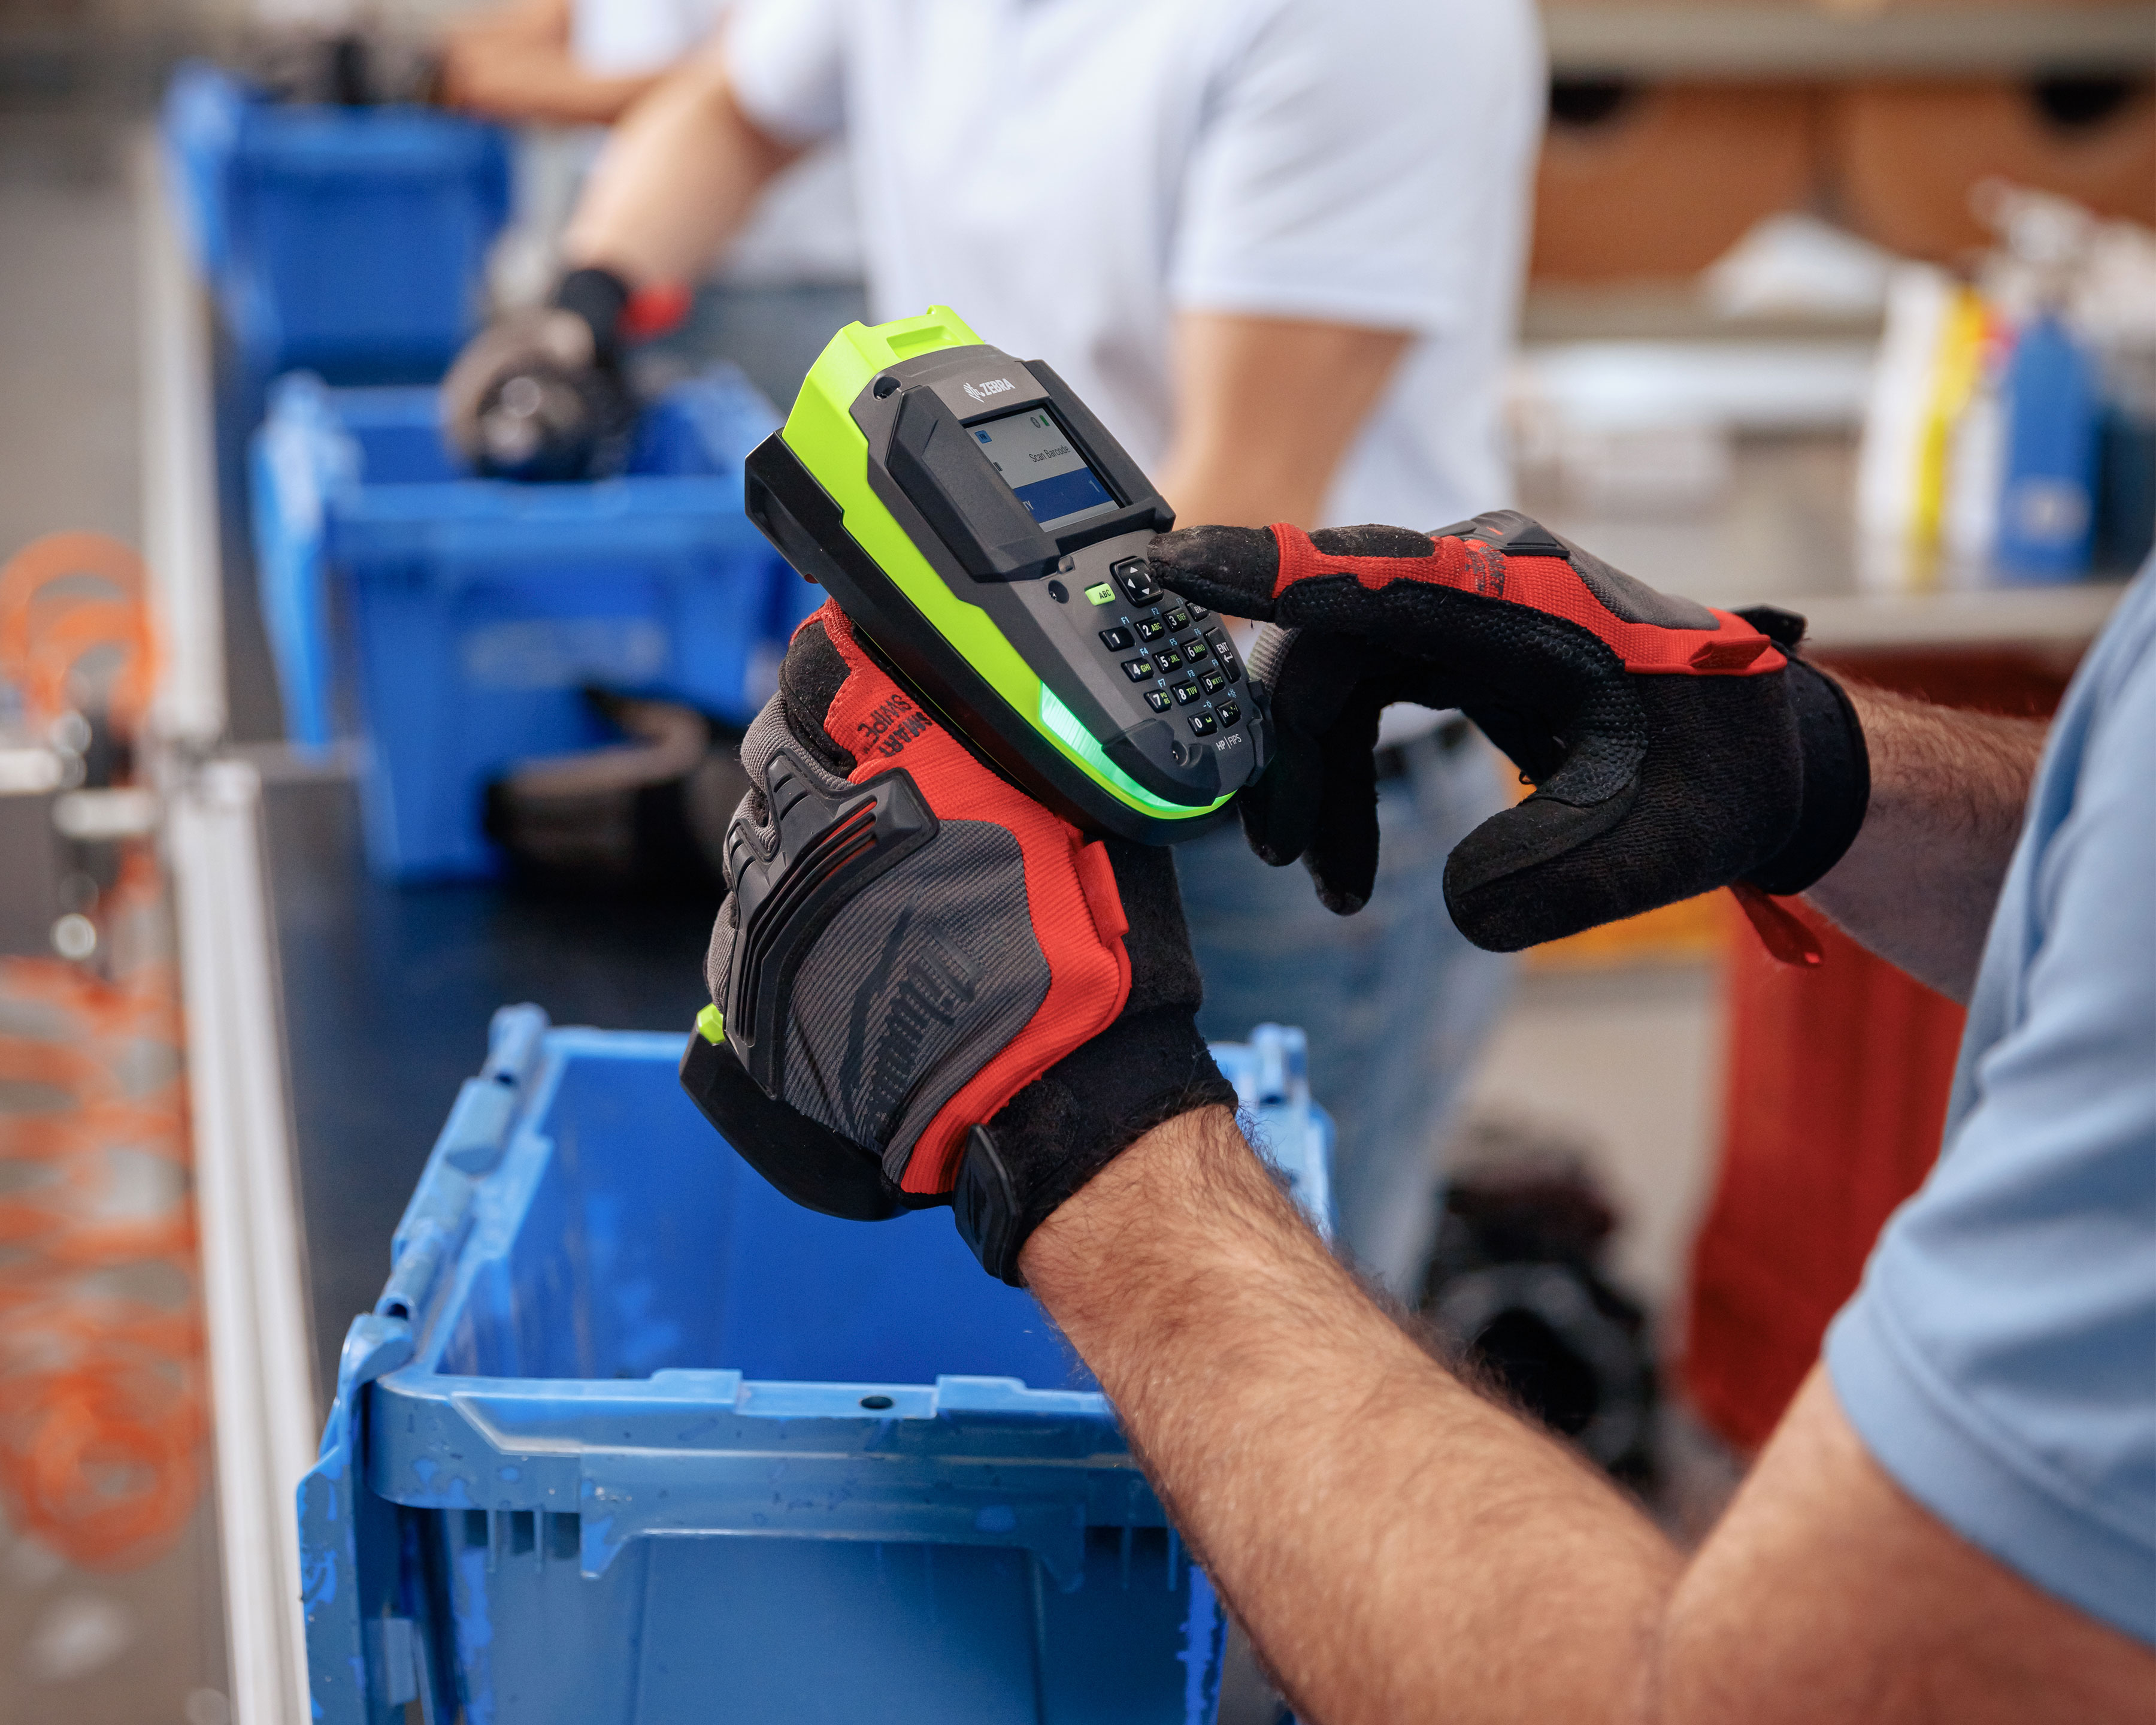 Worker uses the keypad of Zebra DS3600 barcode scanner in a manufacturing plant as other workers pack products in blue storage bins